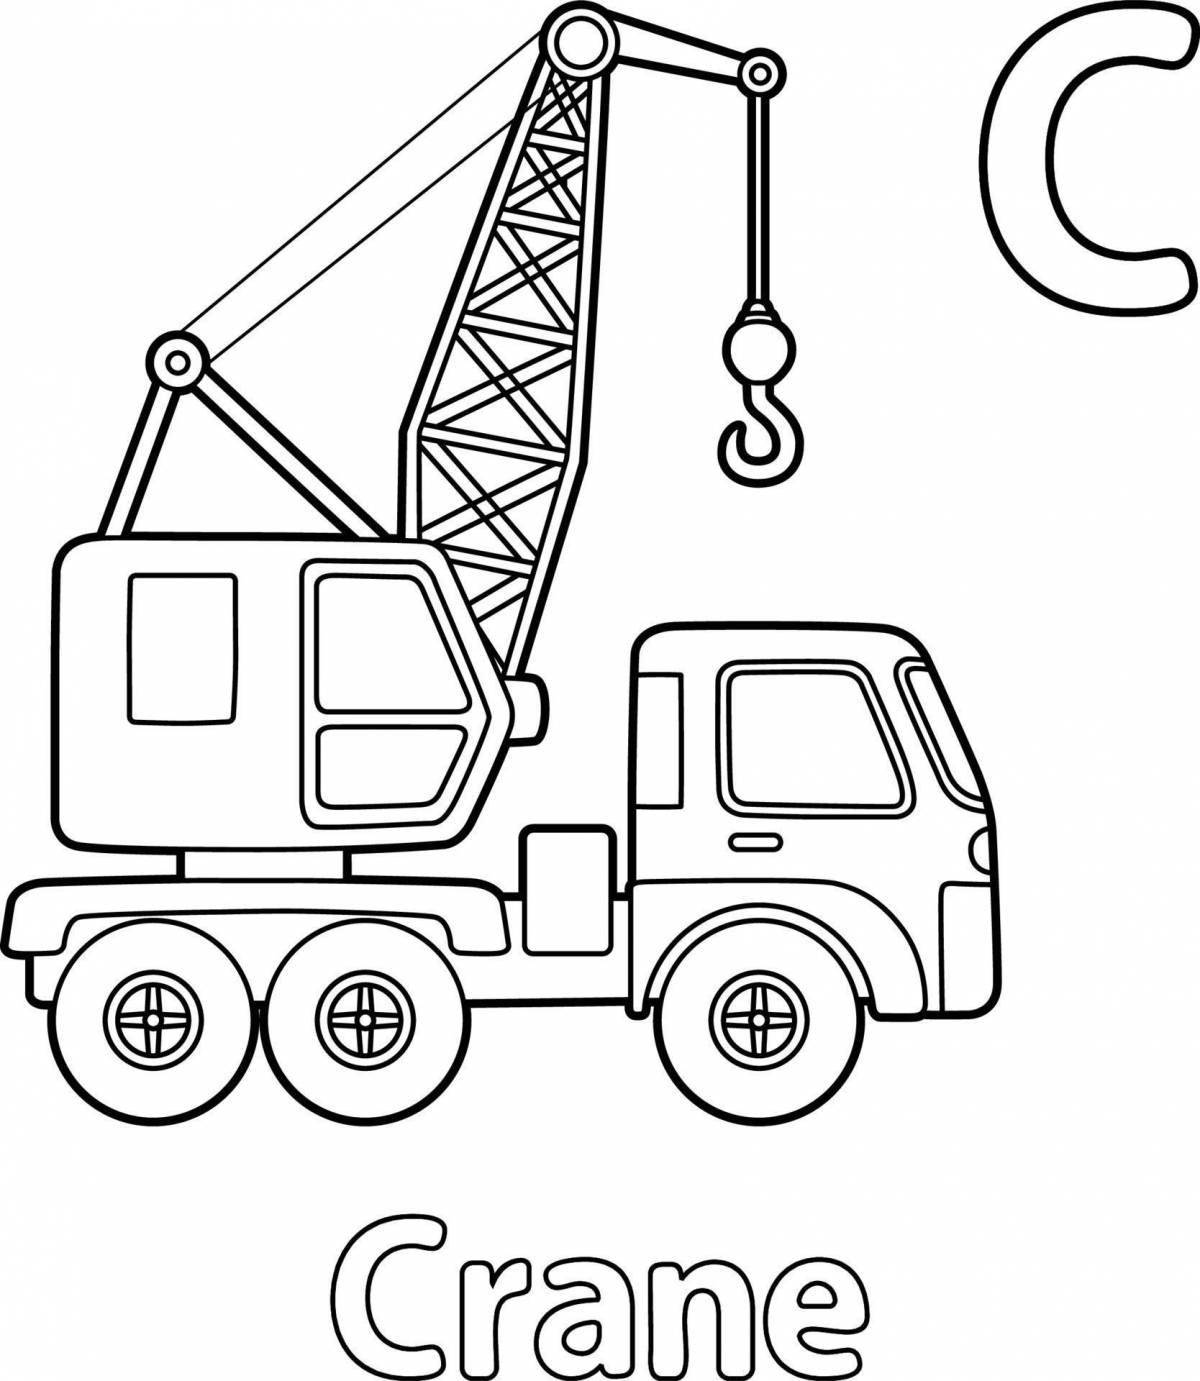 Coloring crane for 4-5 year olds